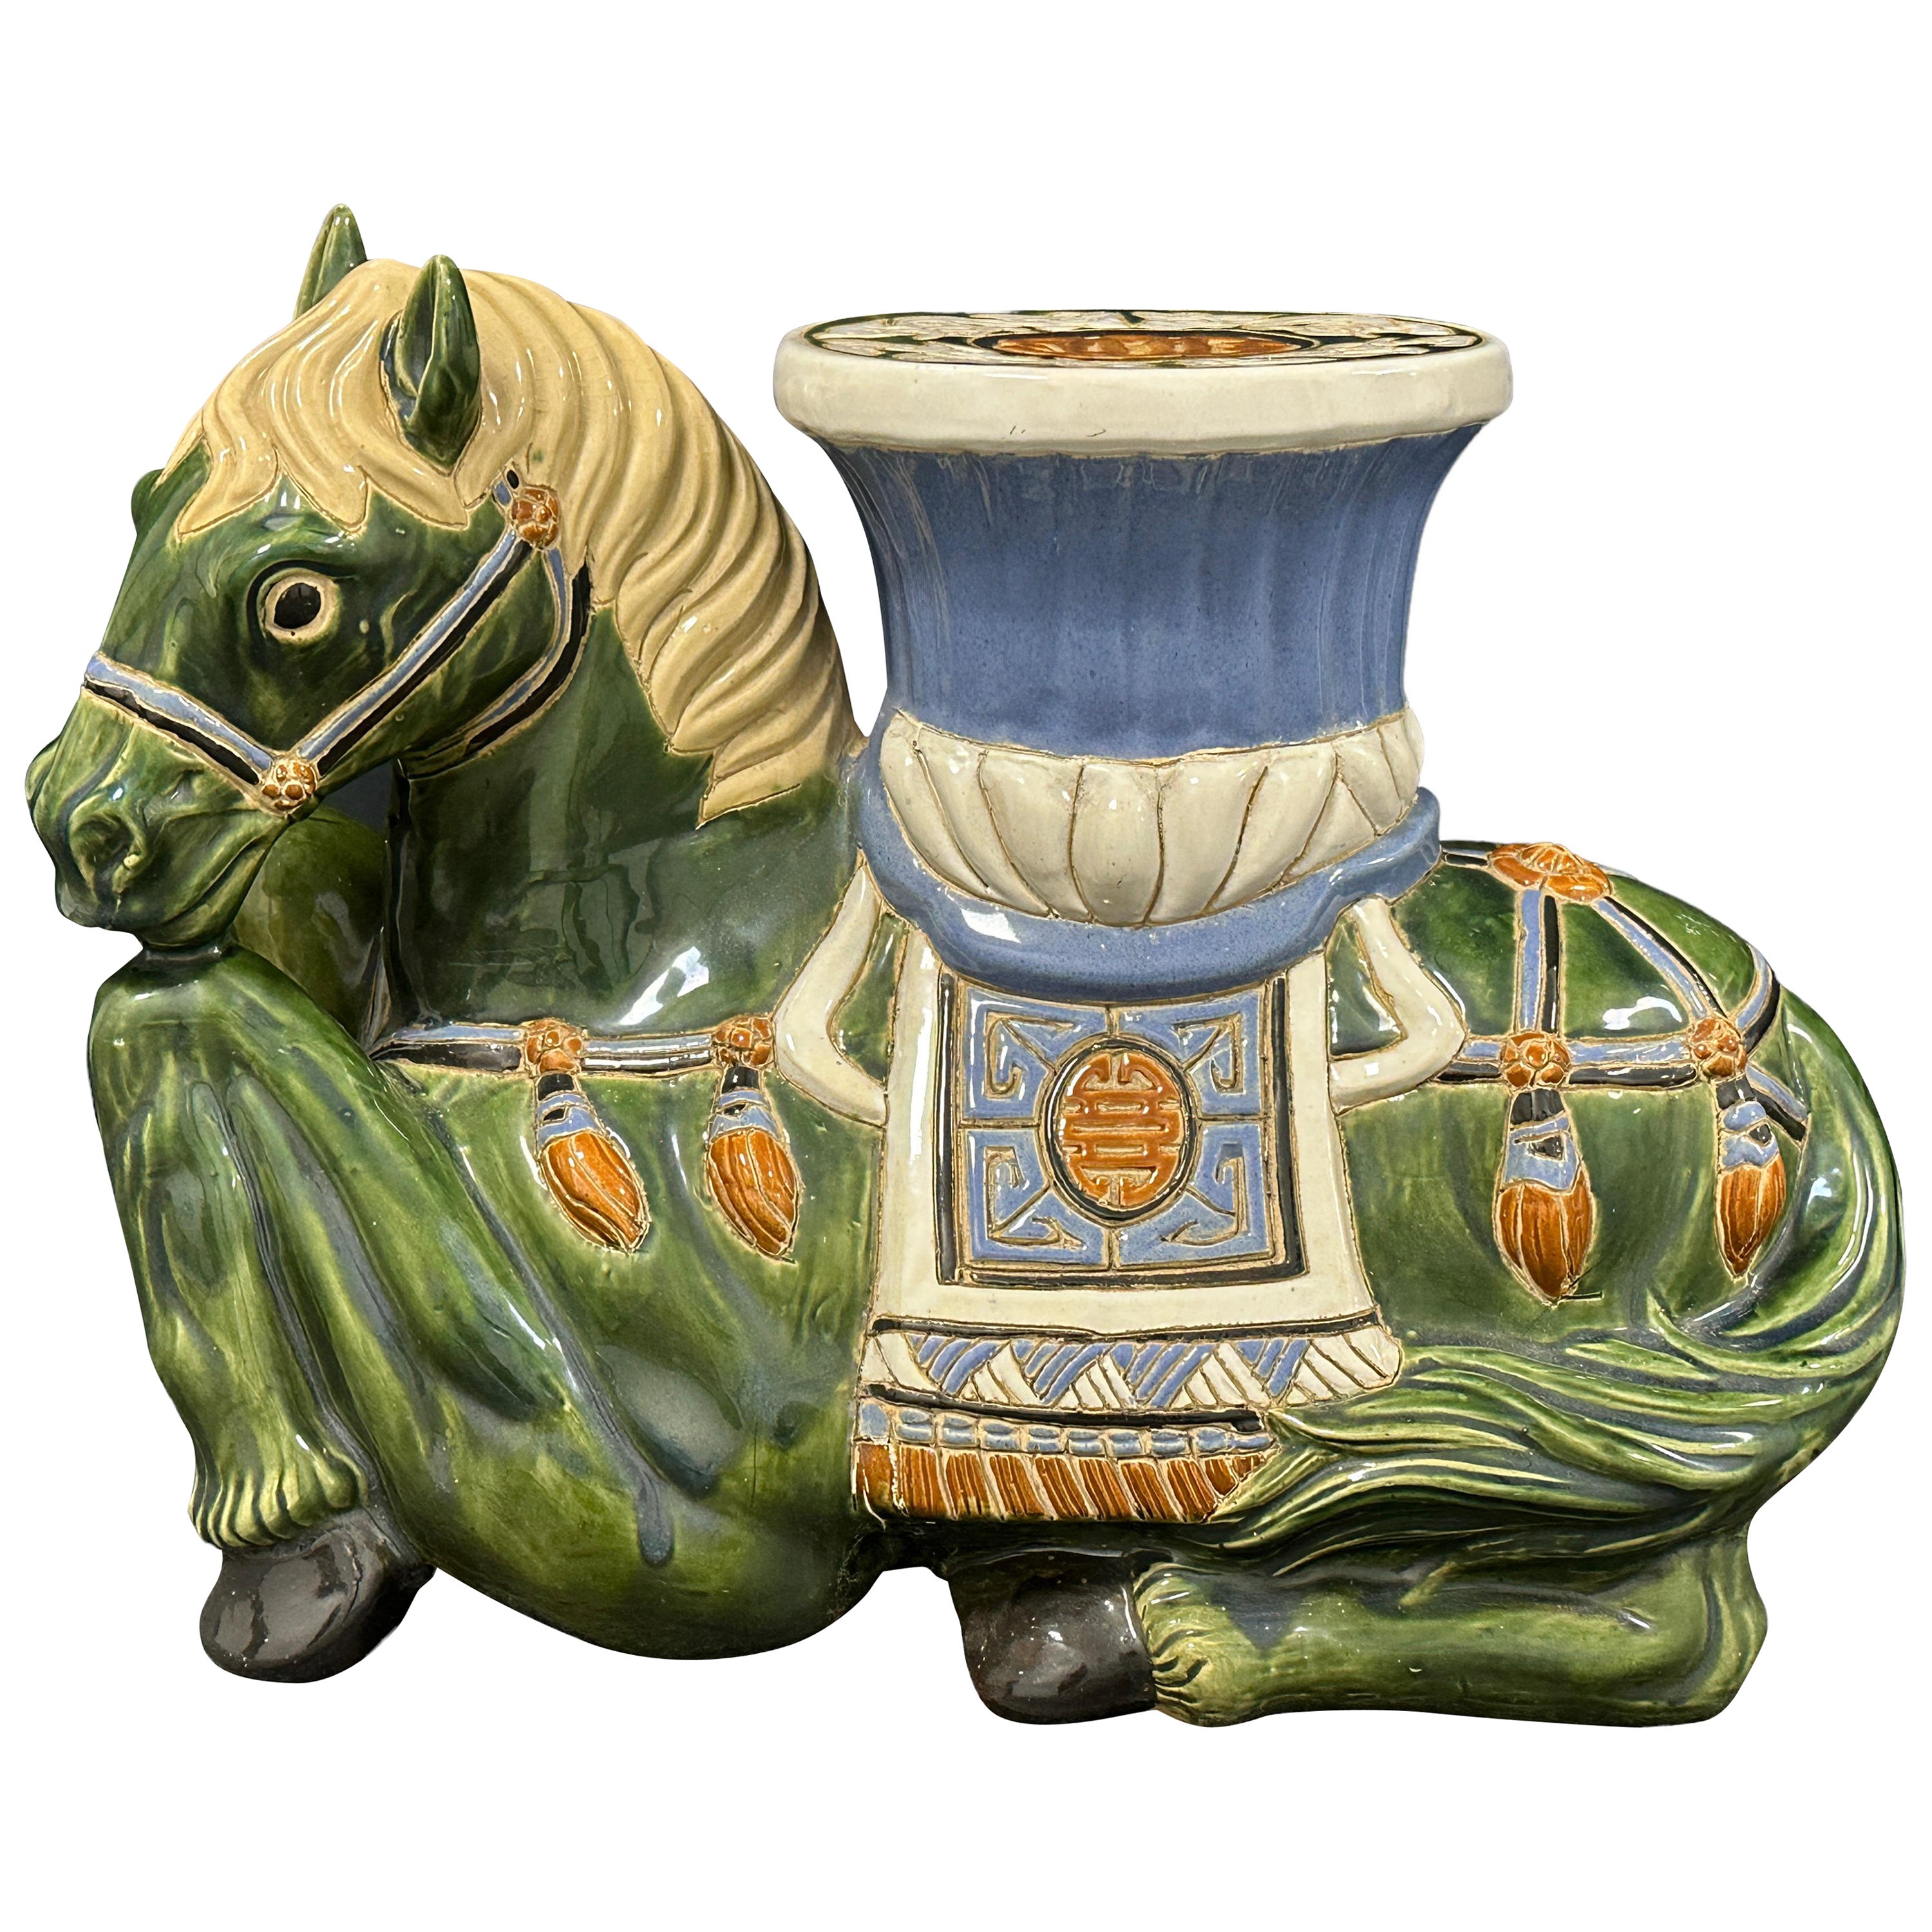 Hollywood Regency Chinese Horse Garden Stool (tabouret de jardin) Plant Stand or Seat (siège ou support pour plantes)